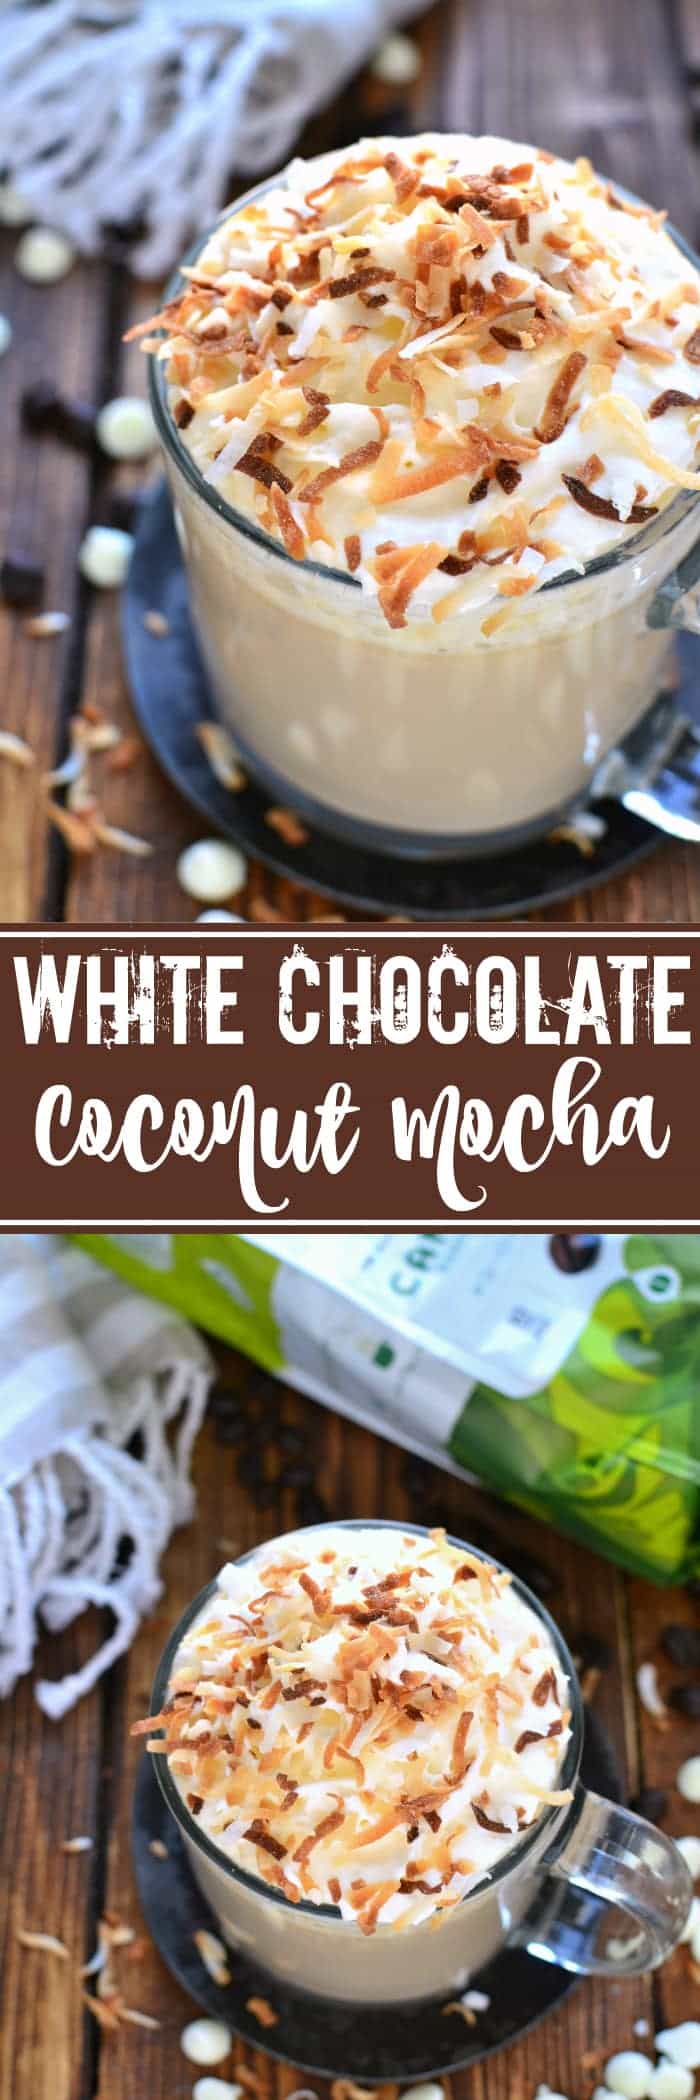 This Coconut White Chocolate Mocha is just like your favorite coffeehouse special! The perfect way to treat yourself....at home!